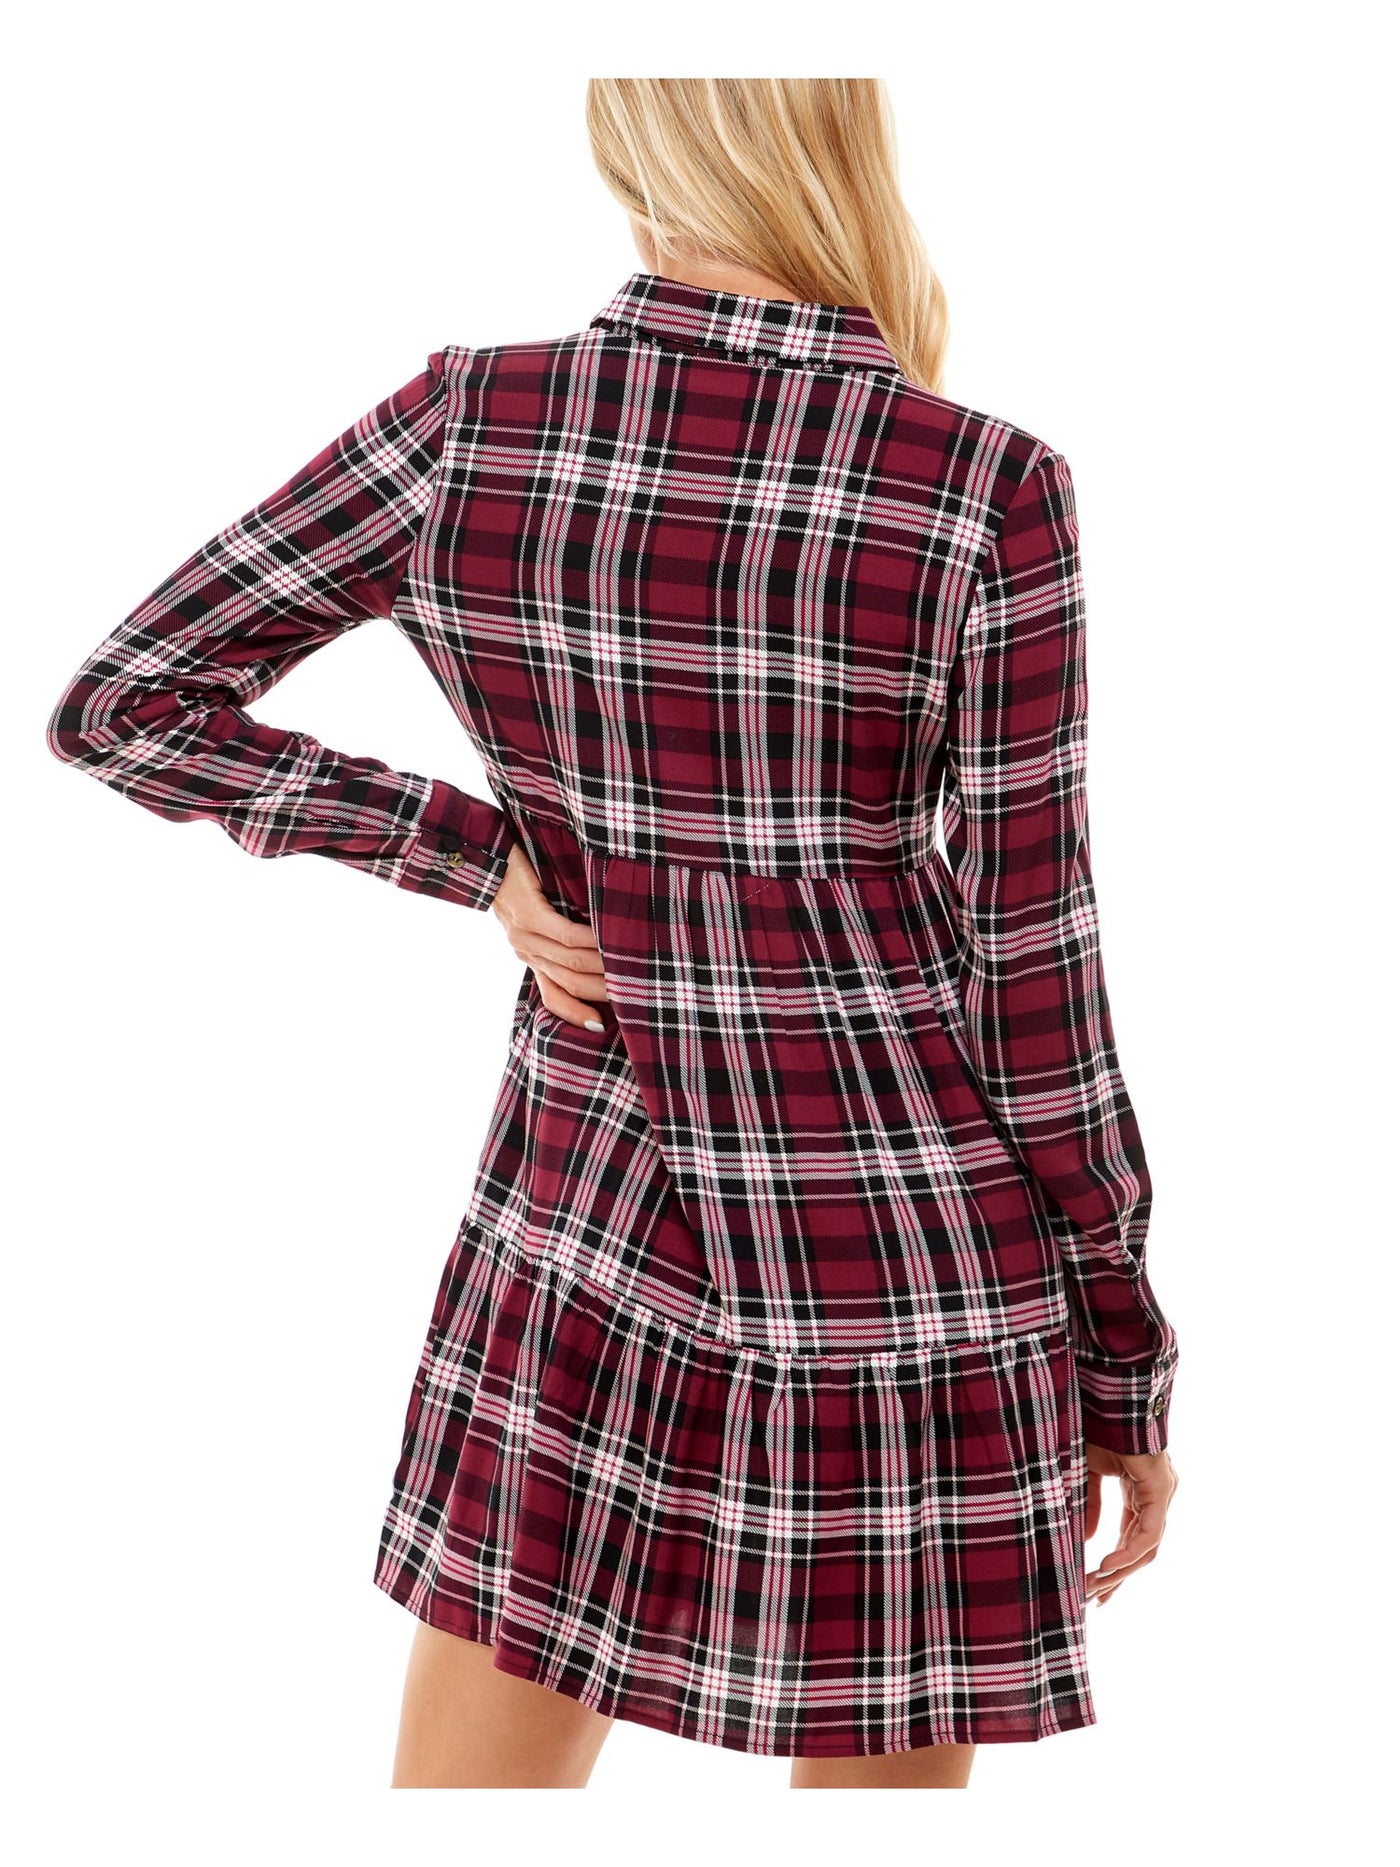 ULTRA FLIRT Womens Maroon Plaid Cuffed Sleeve Point Collar Above The Knee Wear To Work Fit + Flare Dress M